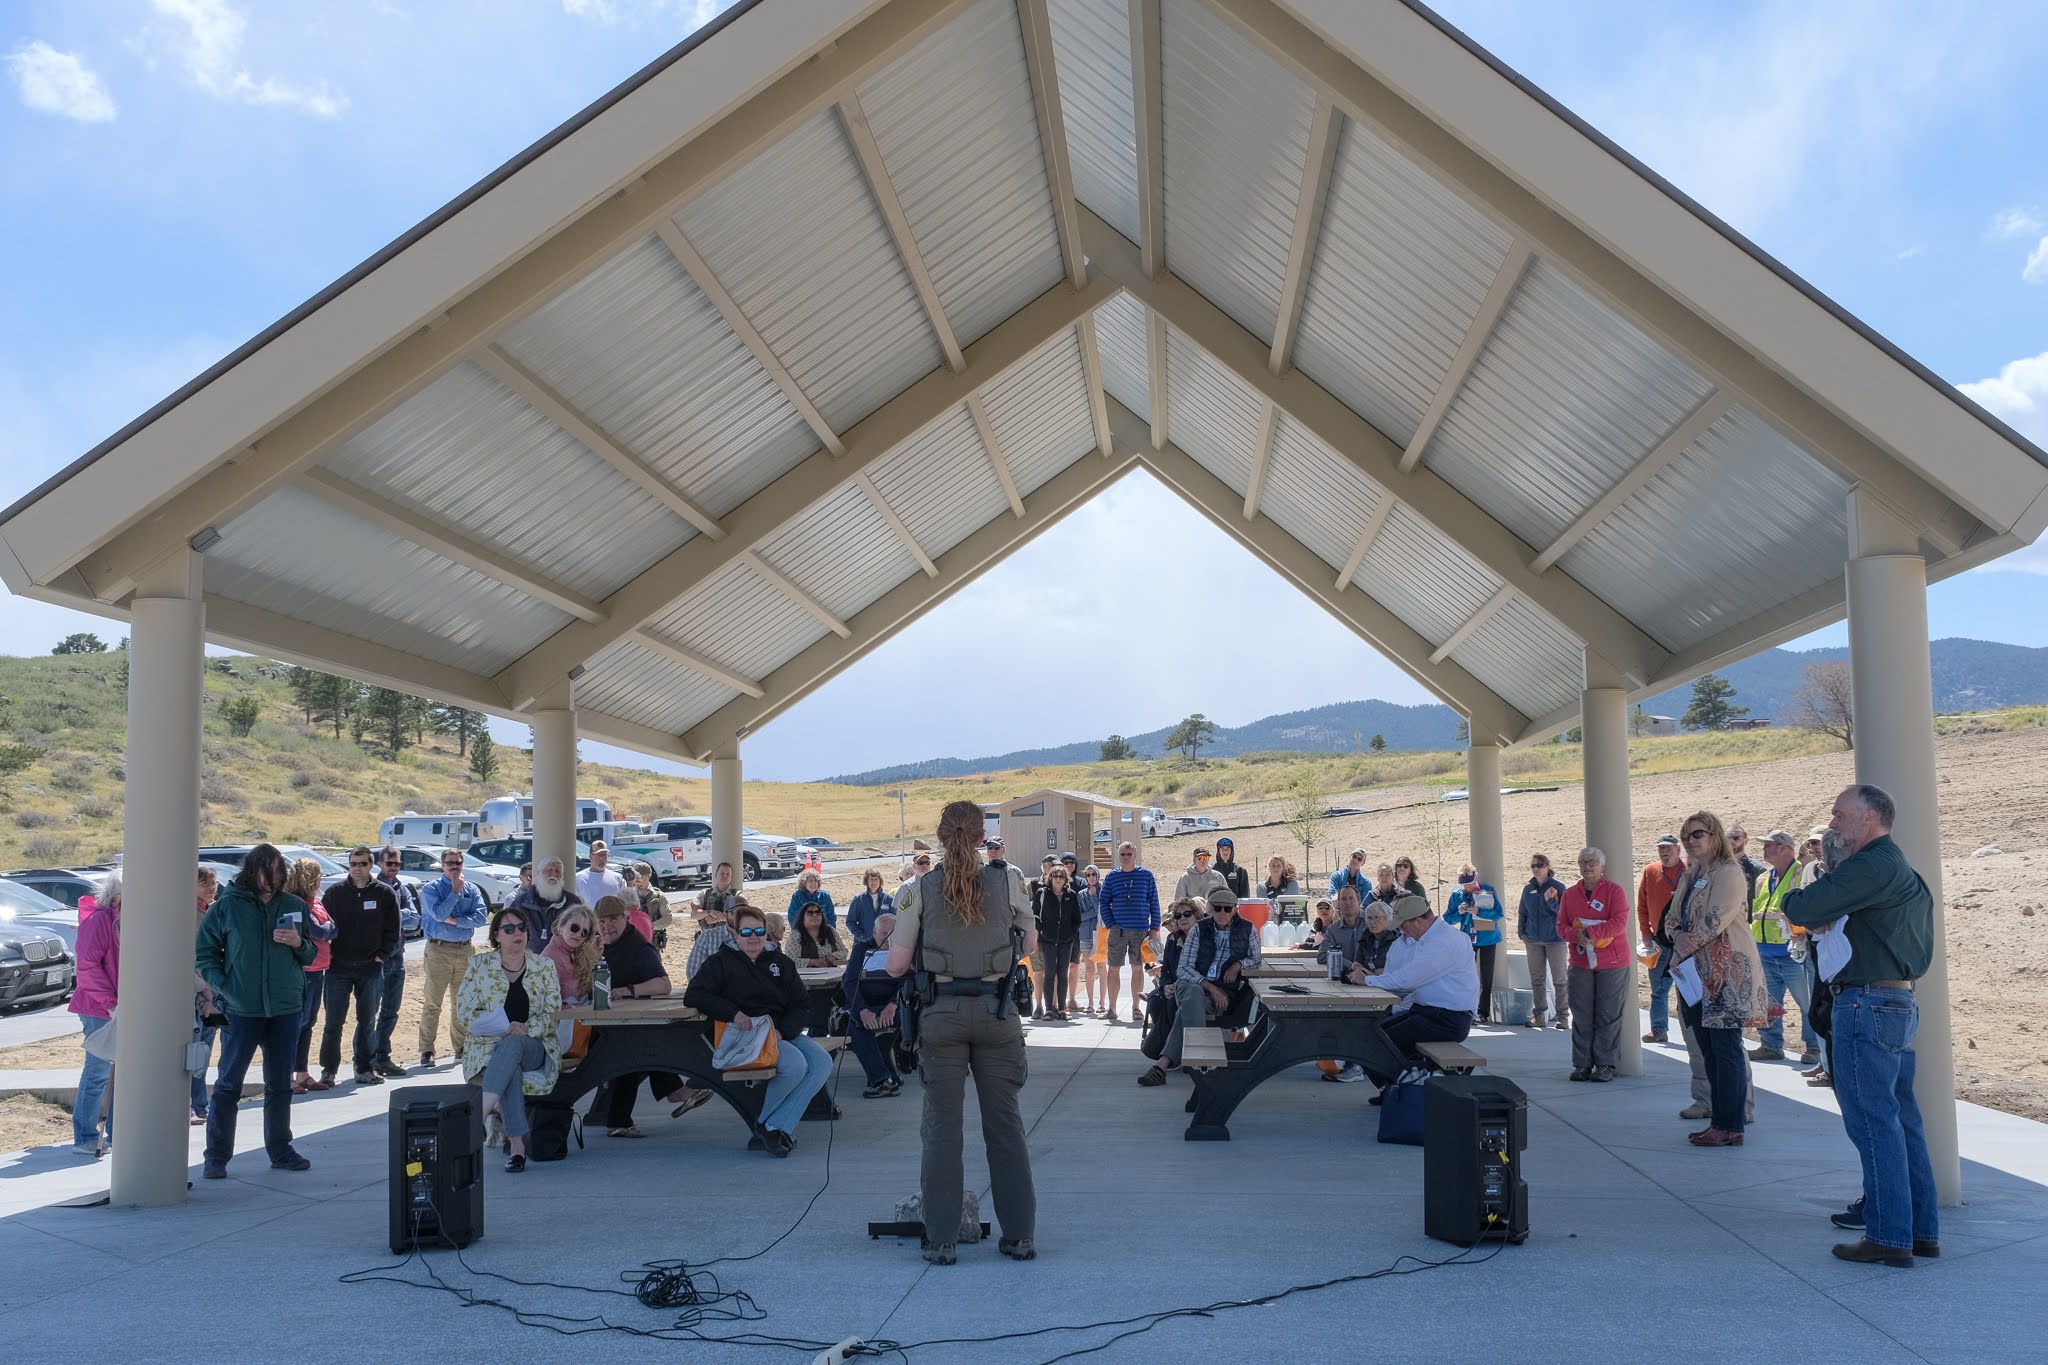 Image 1: Cindy Claggett, Carter Lake District Manager, addresses the crowd during the Sky View Campground ribbon cutting on May 12, 2022. (Rod Cerkoney)